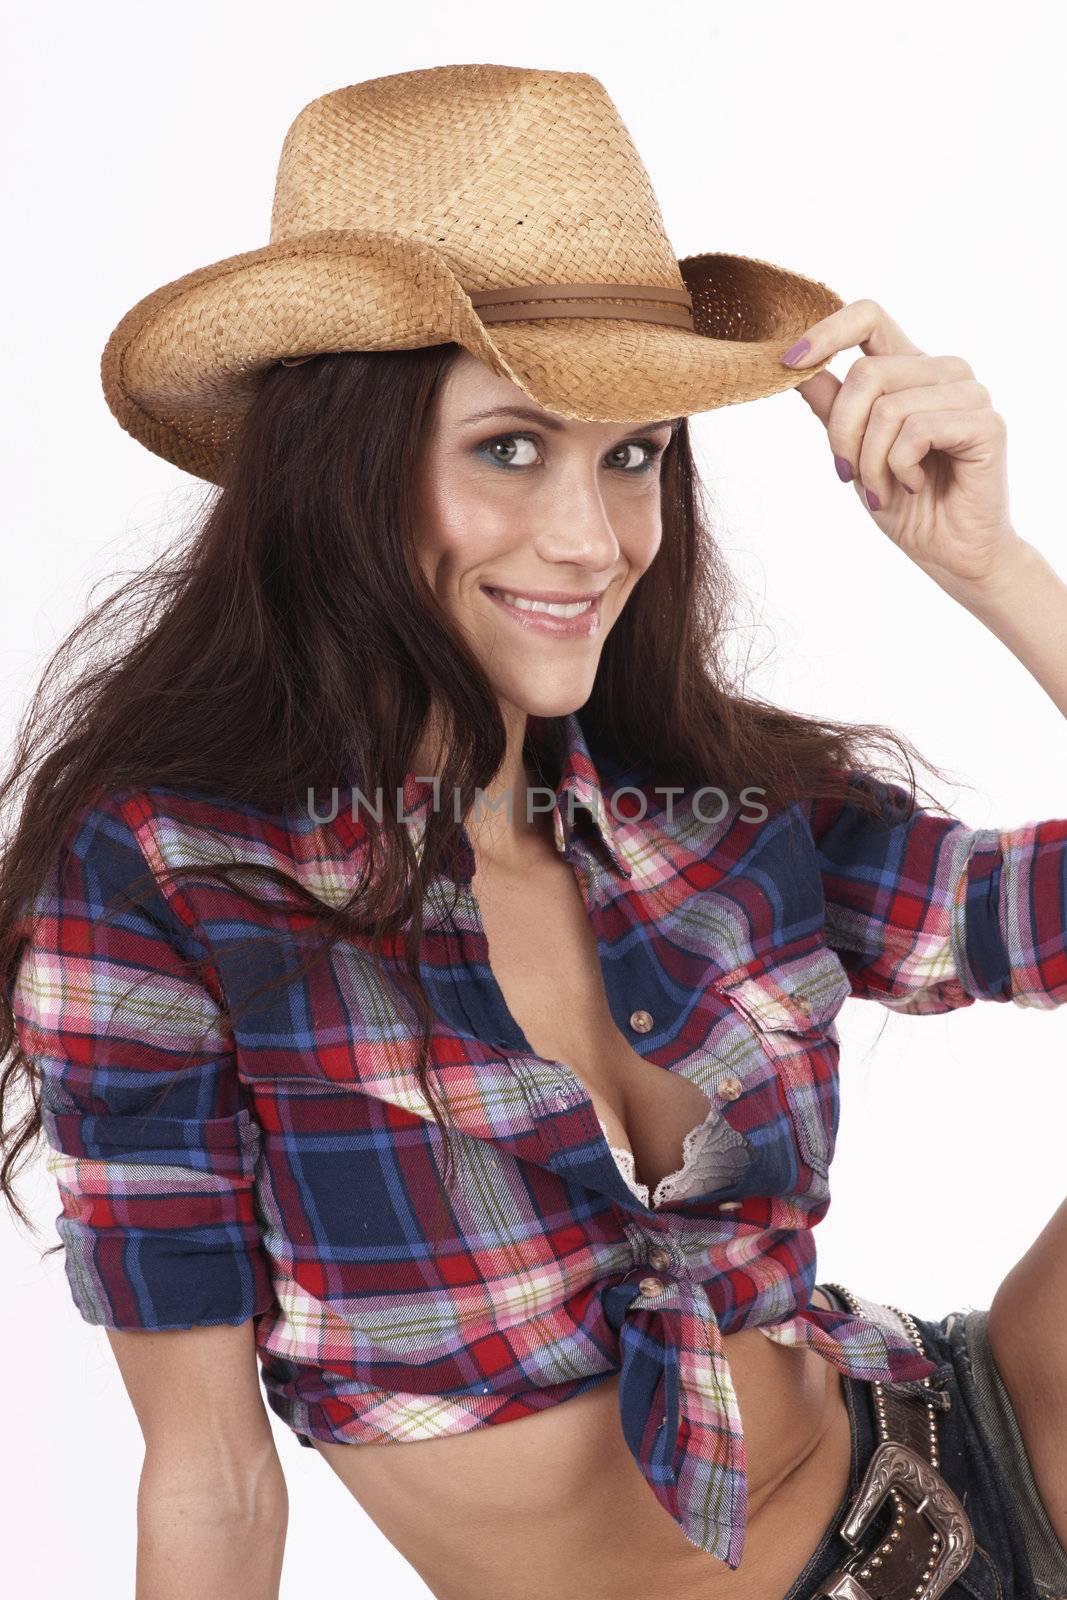 A Beautiful Country Girl tips her hat to you